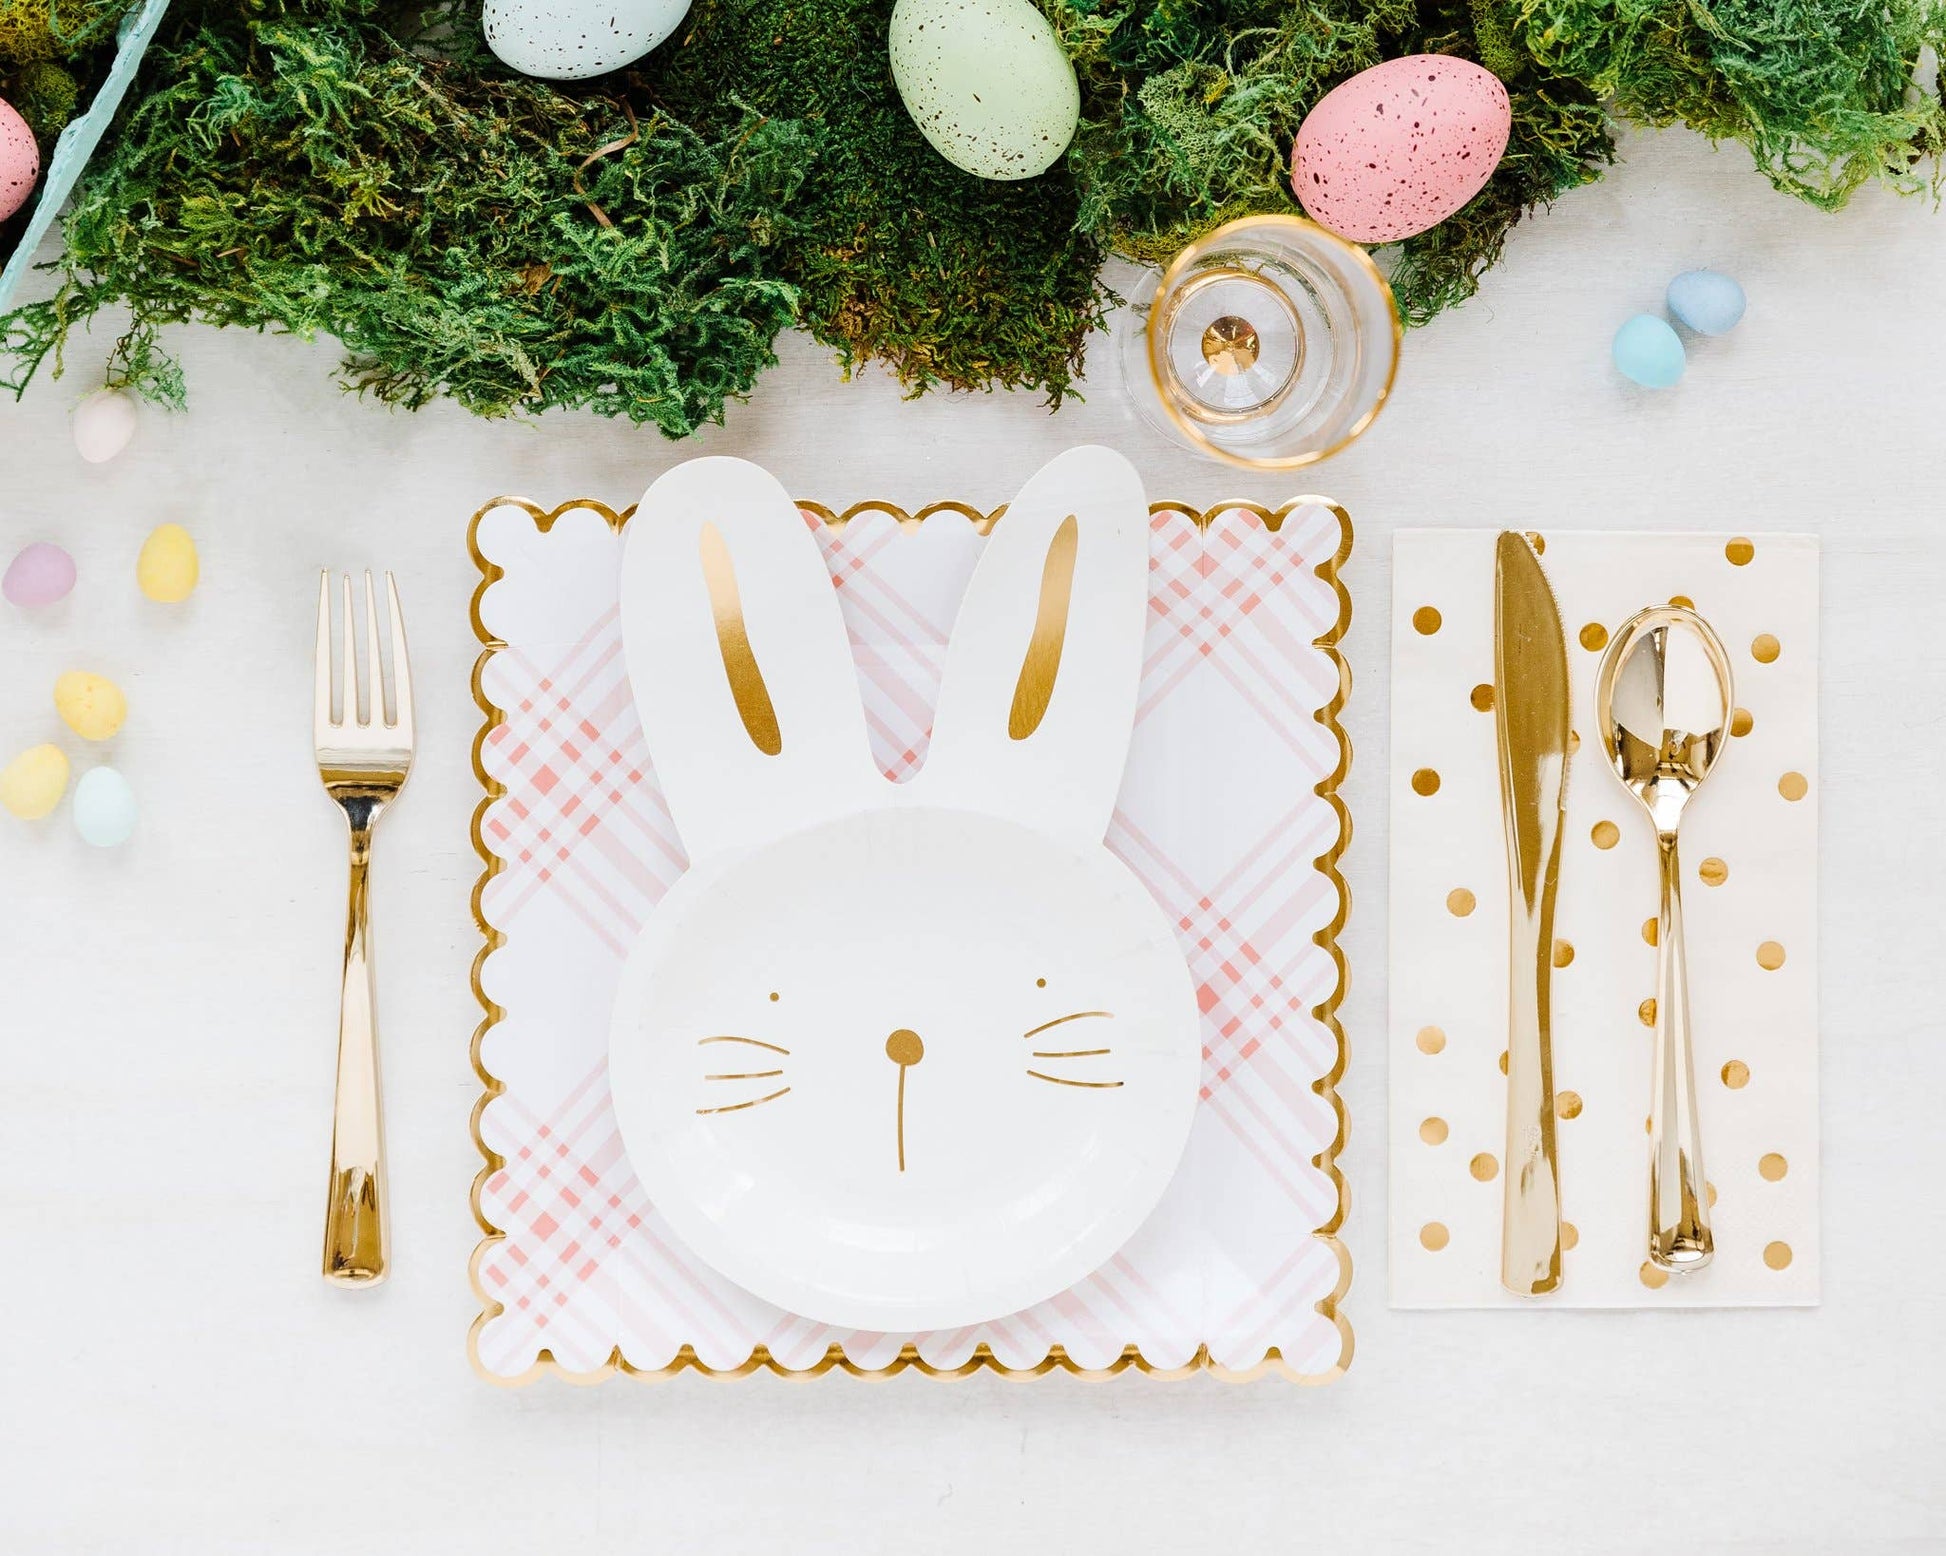 Celebrate Easter in style with these charming bunny plates, embellished with shiny gold accents. They perfectly complement our Scattered Carrots Plate and Blush Napkins for a truly unforgettable Easter gathering., bunny plates, easter party, easter bunny plates, easter brunch, easter decor, spring plates